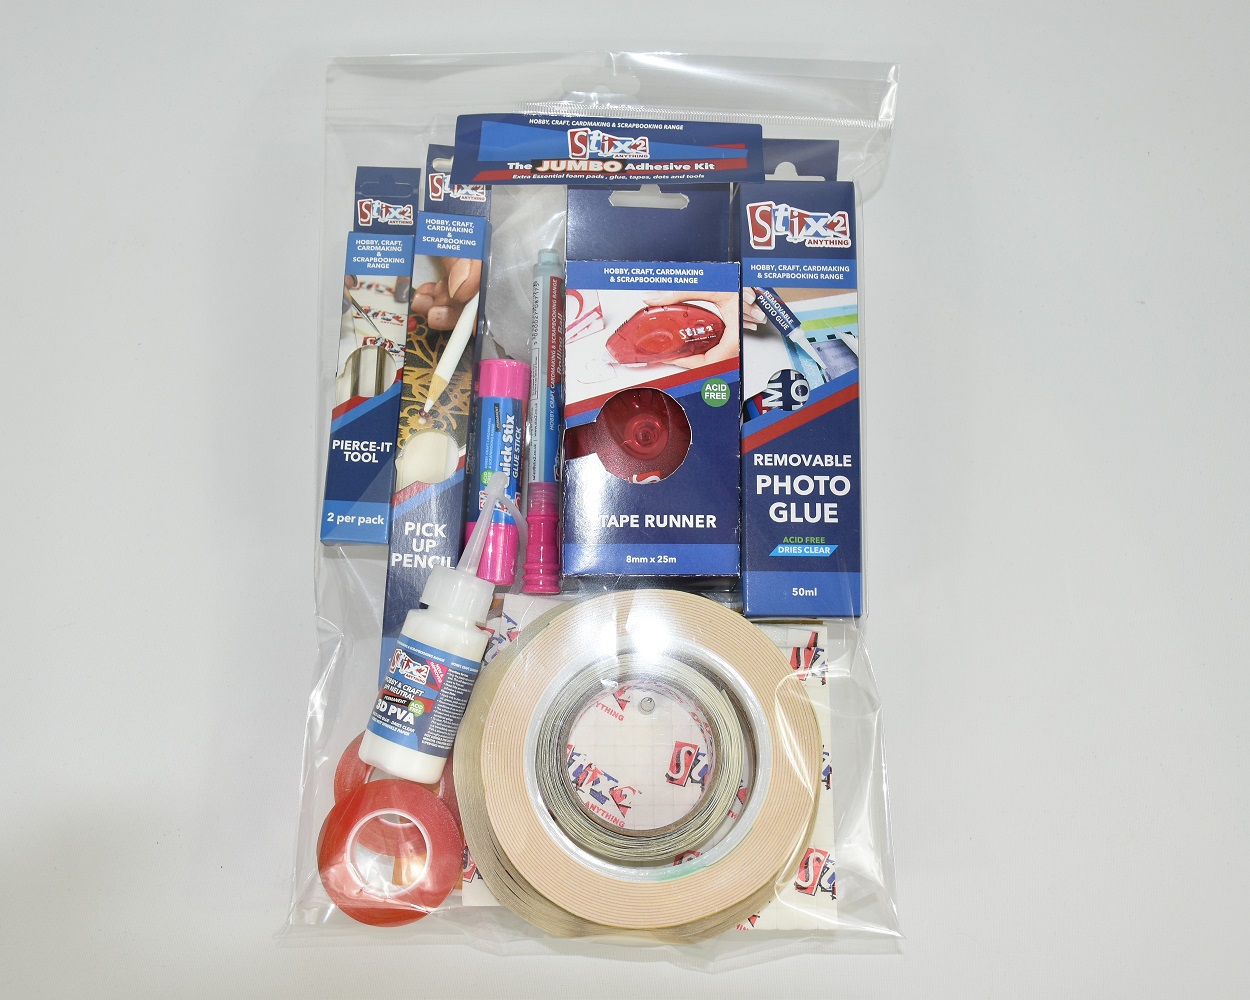 Tape Runner for Tape Pen From Stix2 - Glues and Adhesives